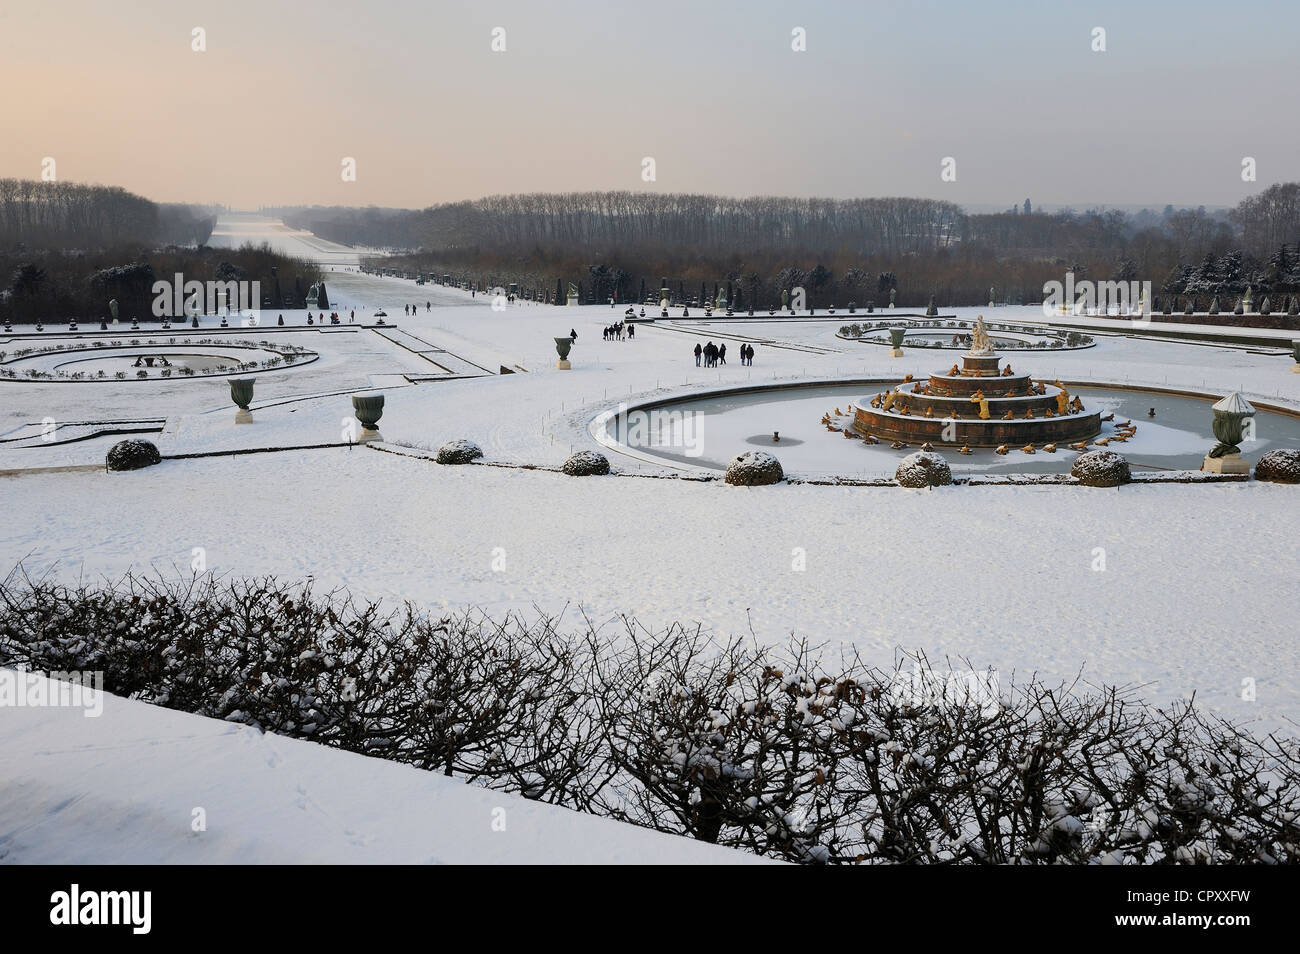 France Yvelines snow covered park of Chateau de Versailles listed as World Heritage by UNESCO Latona Basin gardens perspective Stock Photo